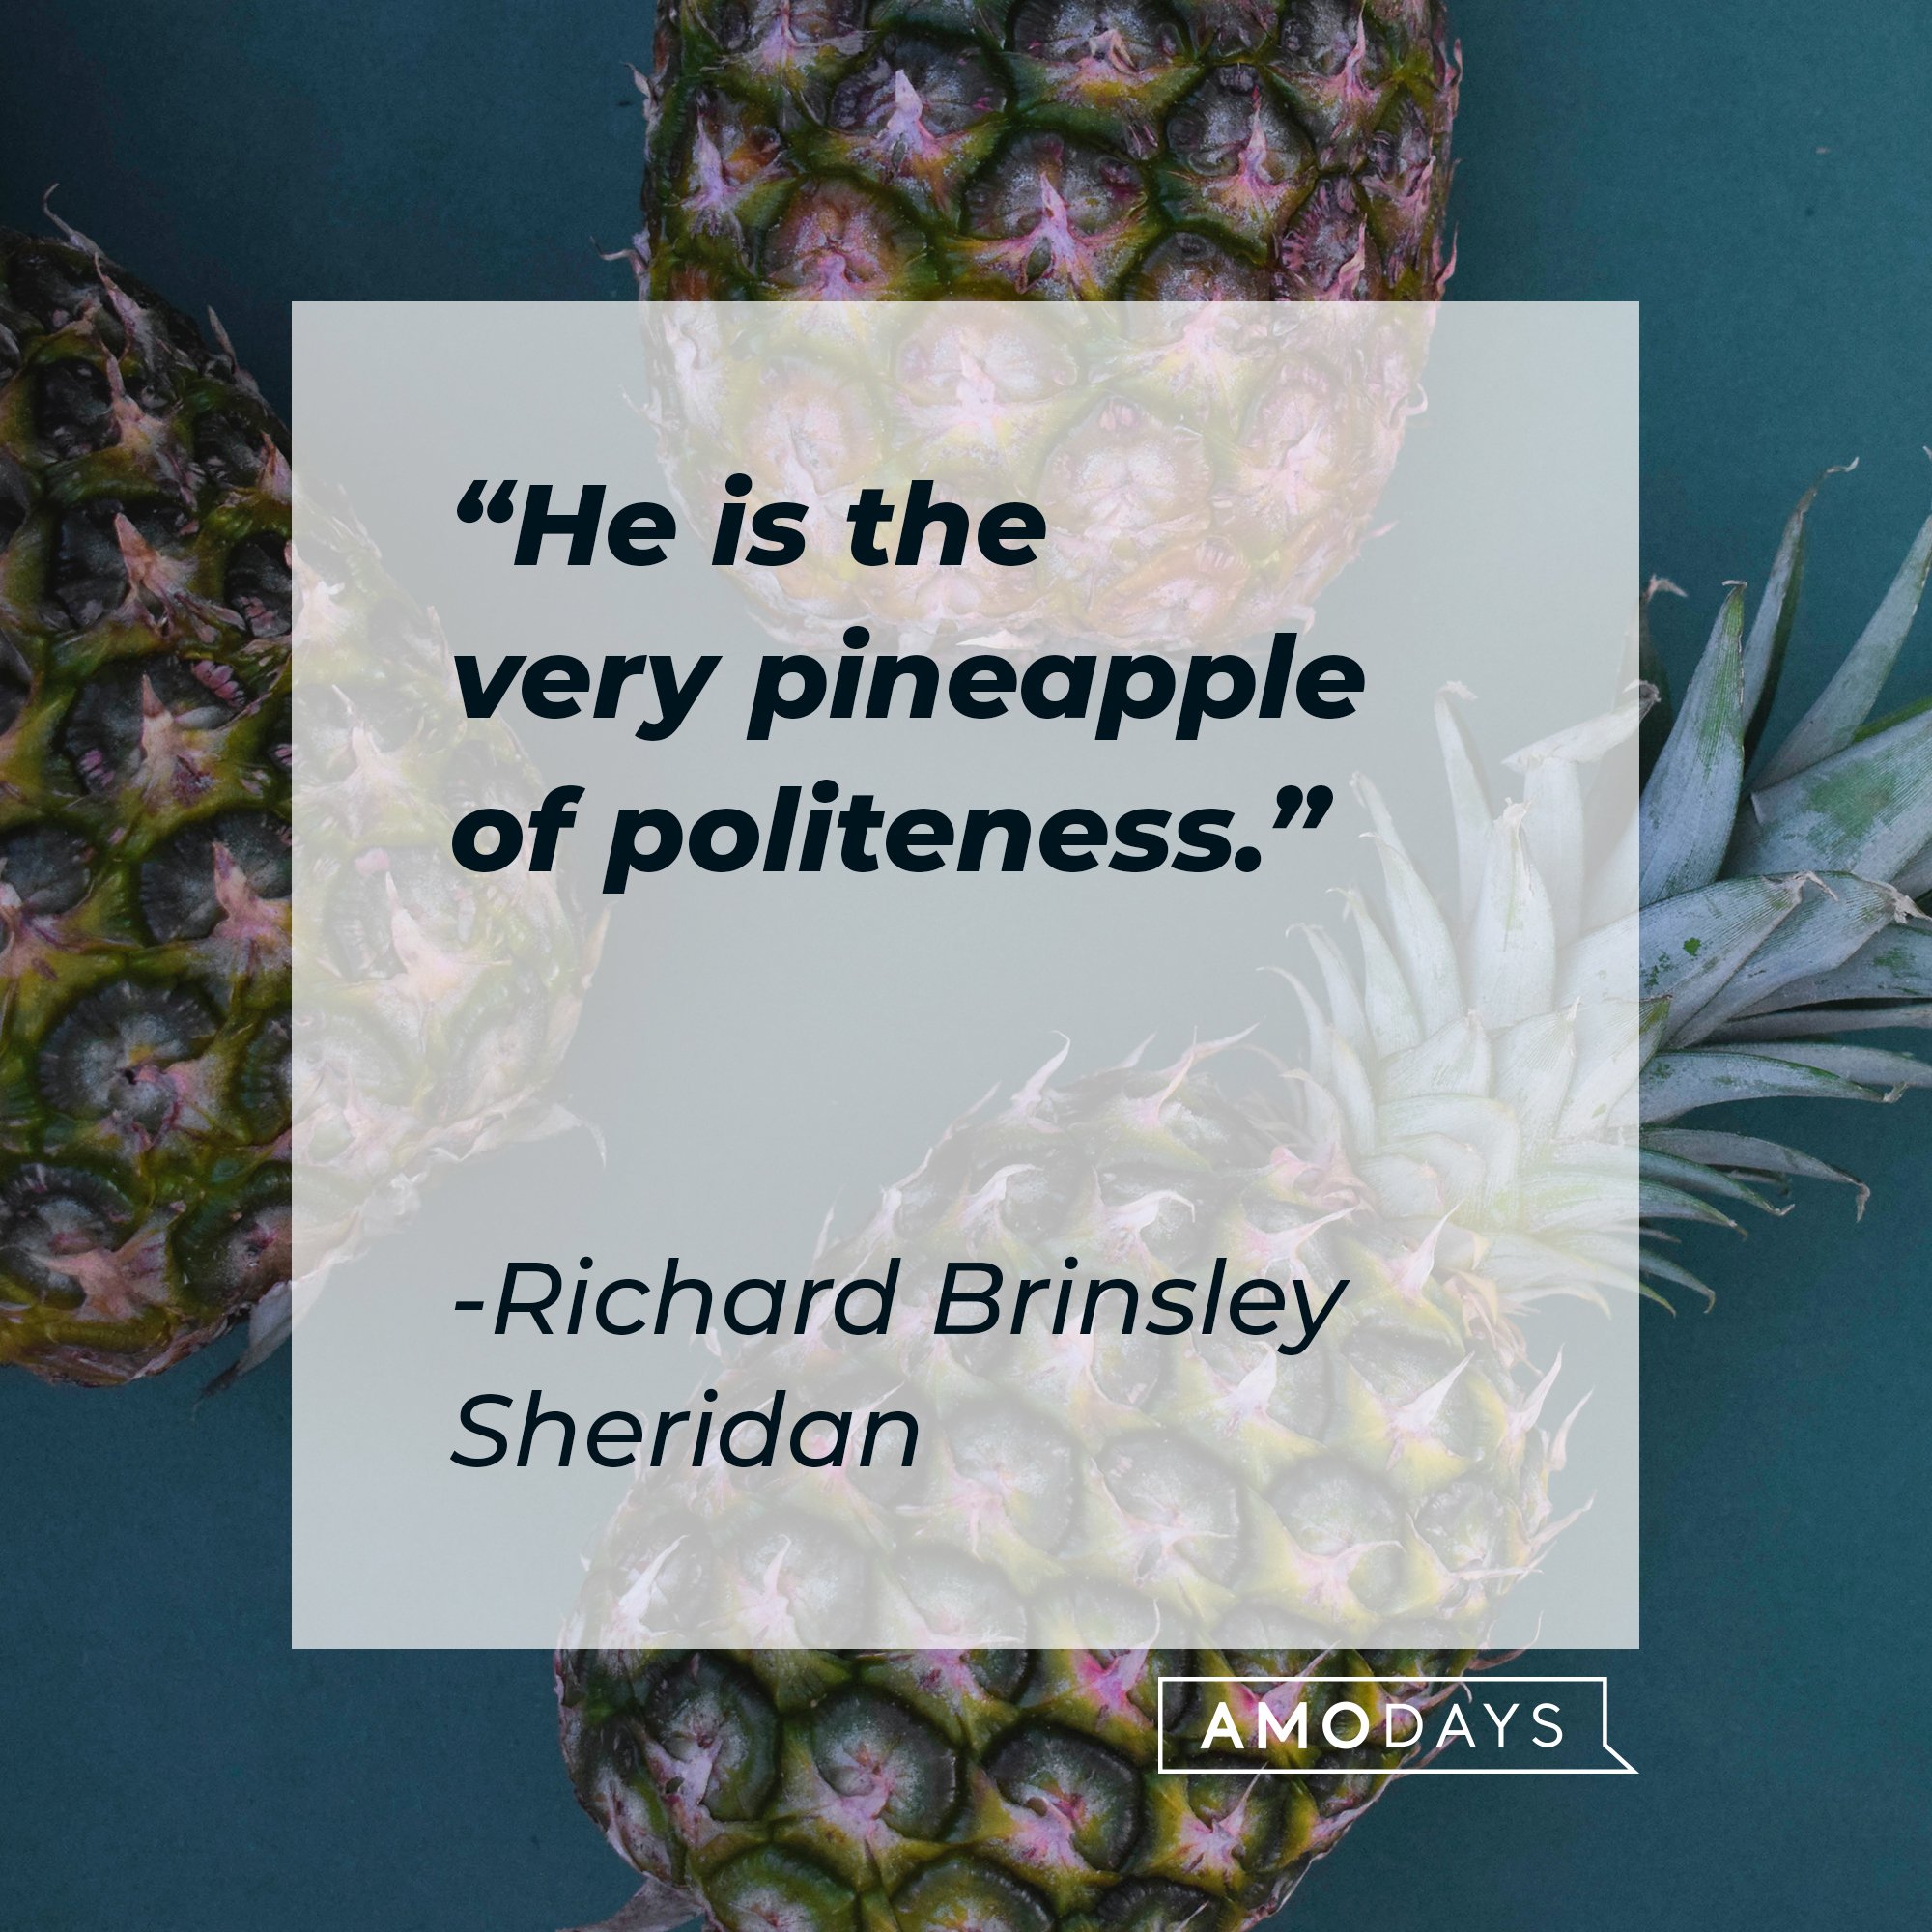 Richard Brinsley Sheridan's quote: "He is the very pineapple of politeness." | Image: AmoDays